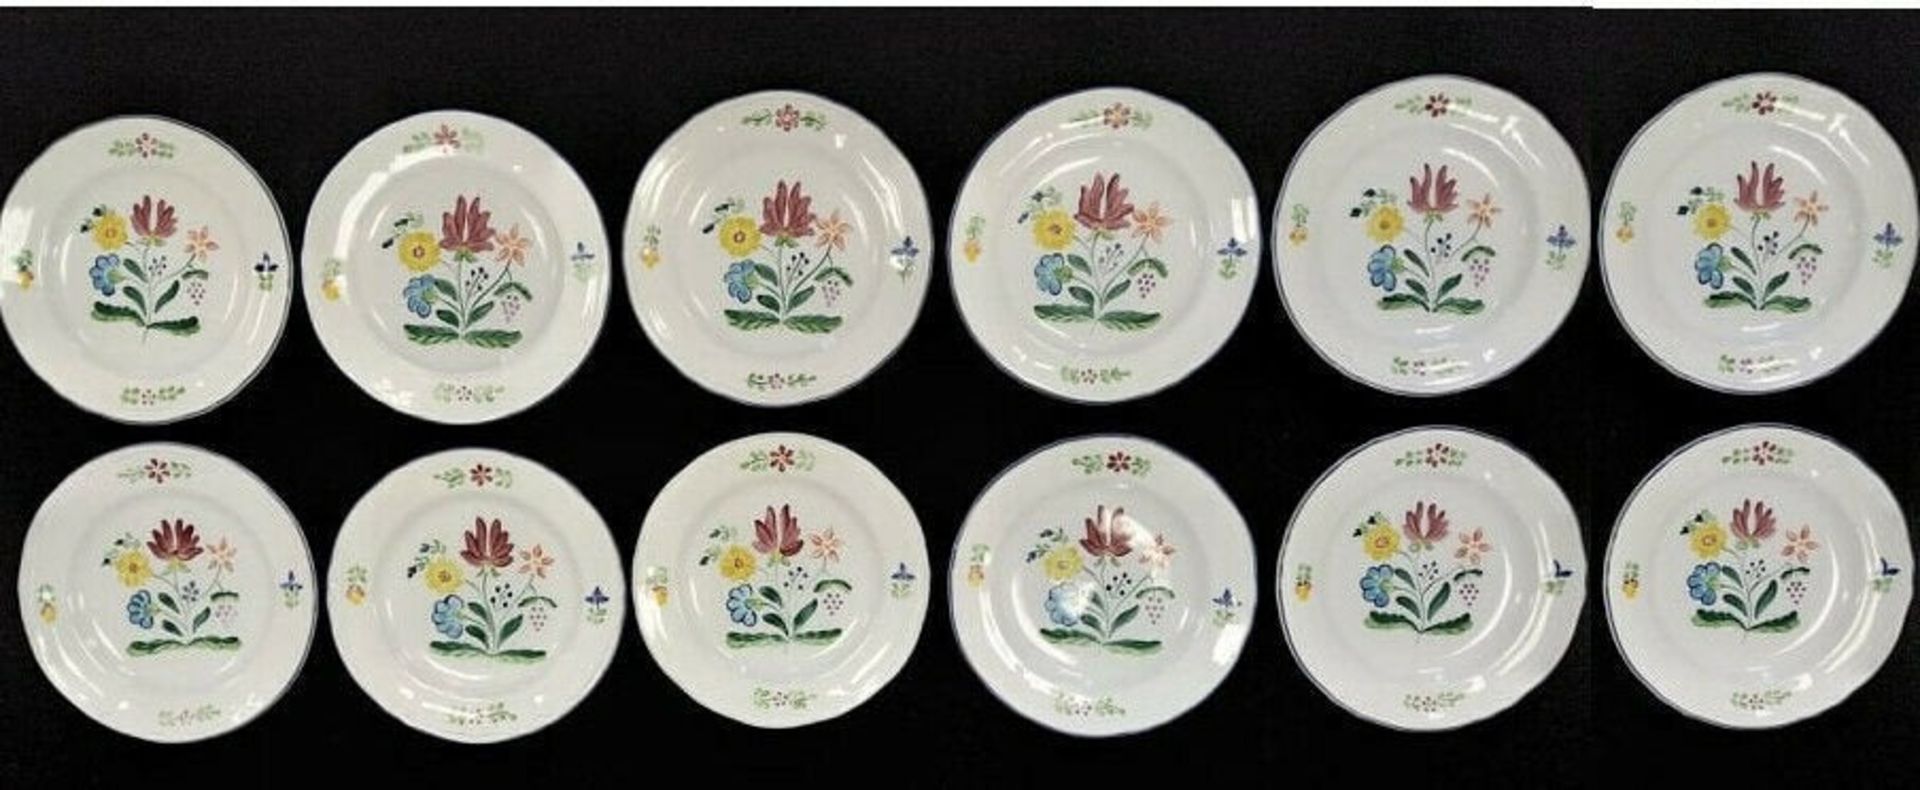 Herend | Side Plates | Handpainted | Hungary